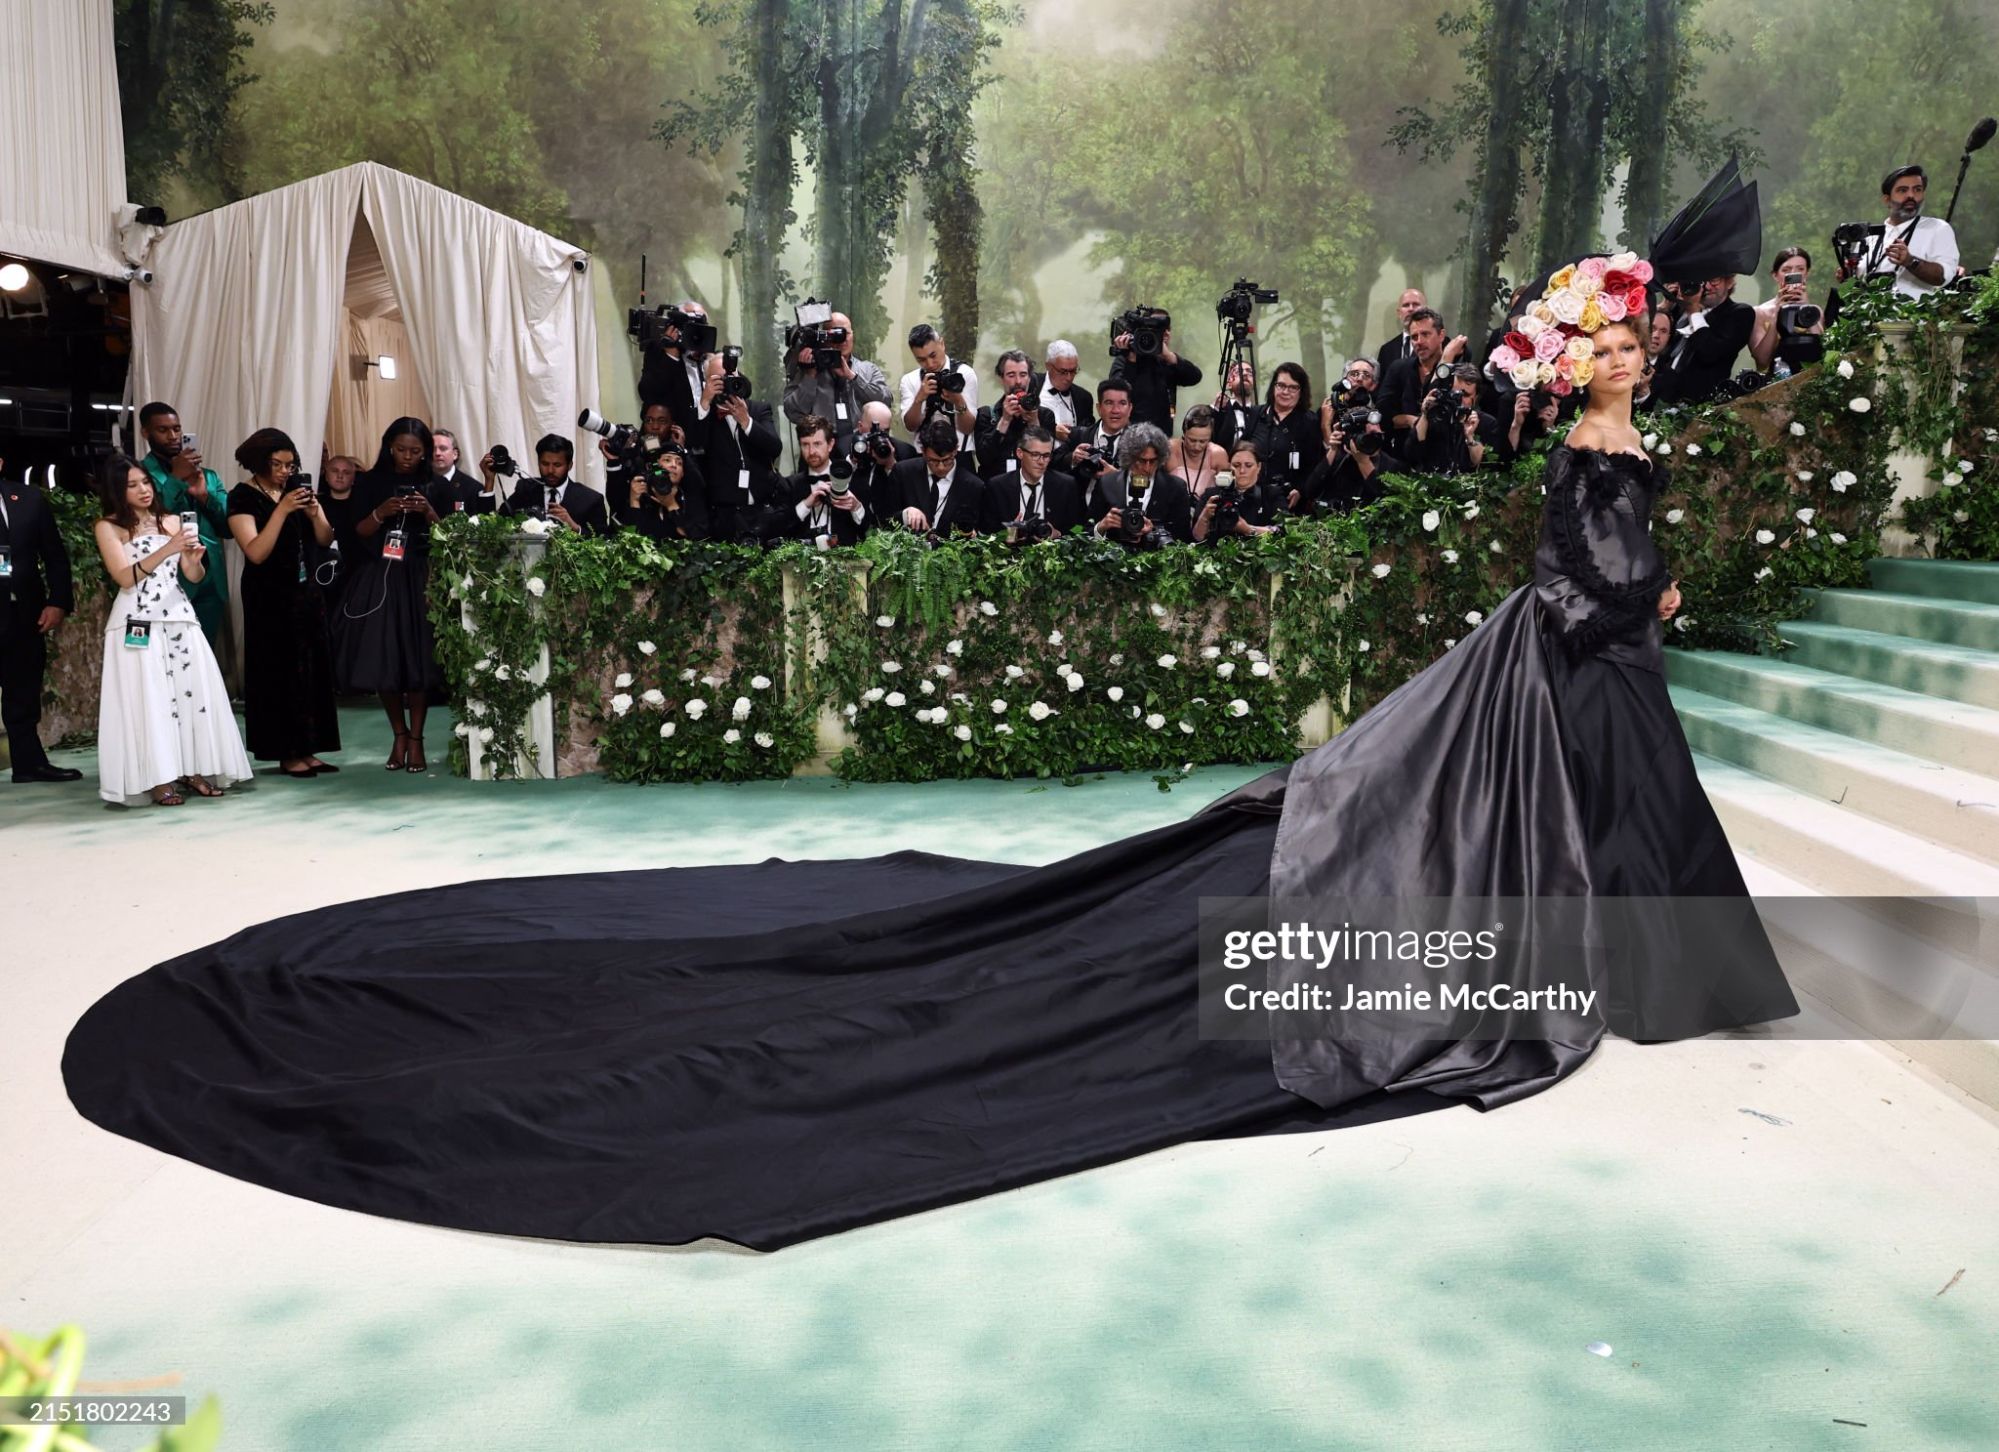 gettyimages-2151802243-2048x2048.jpg